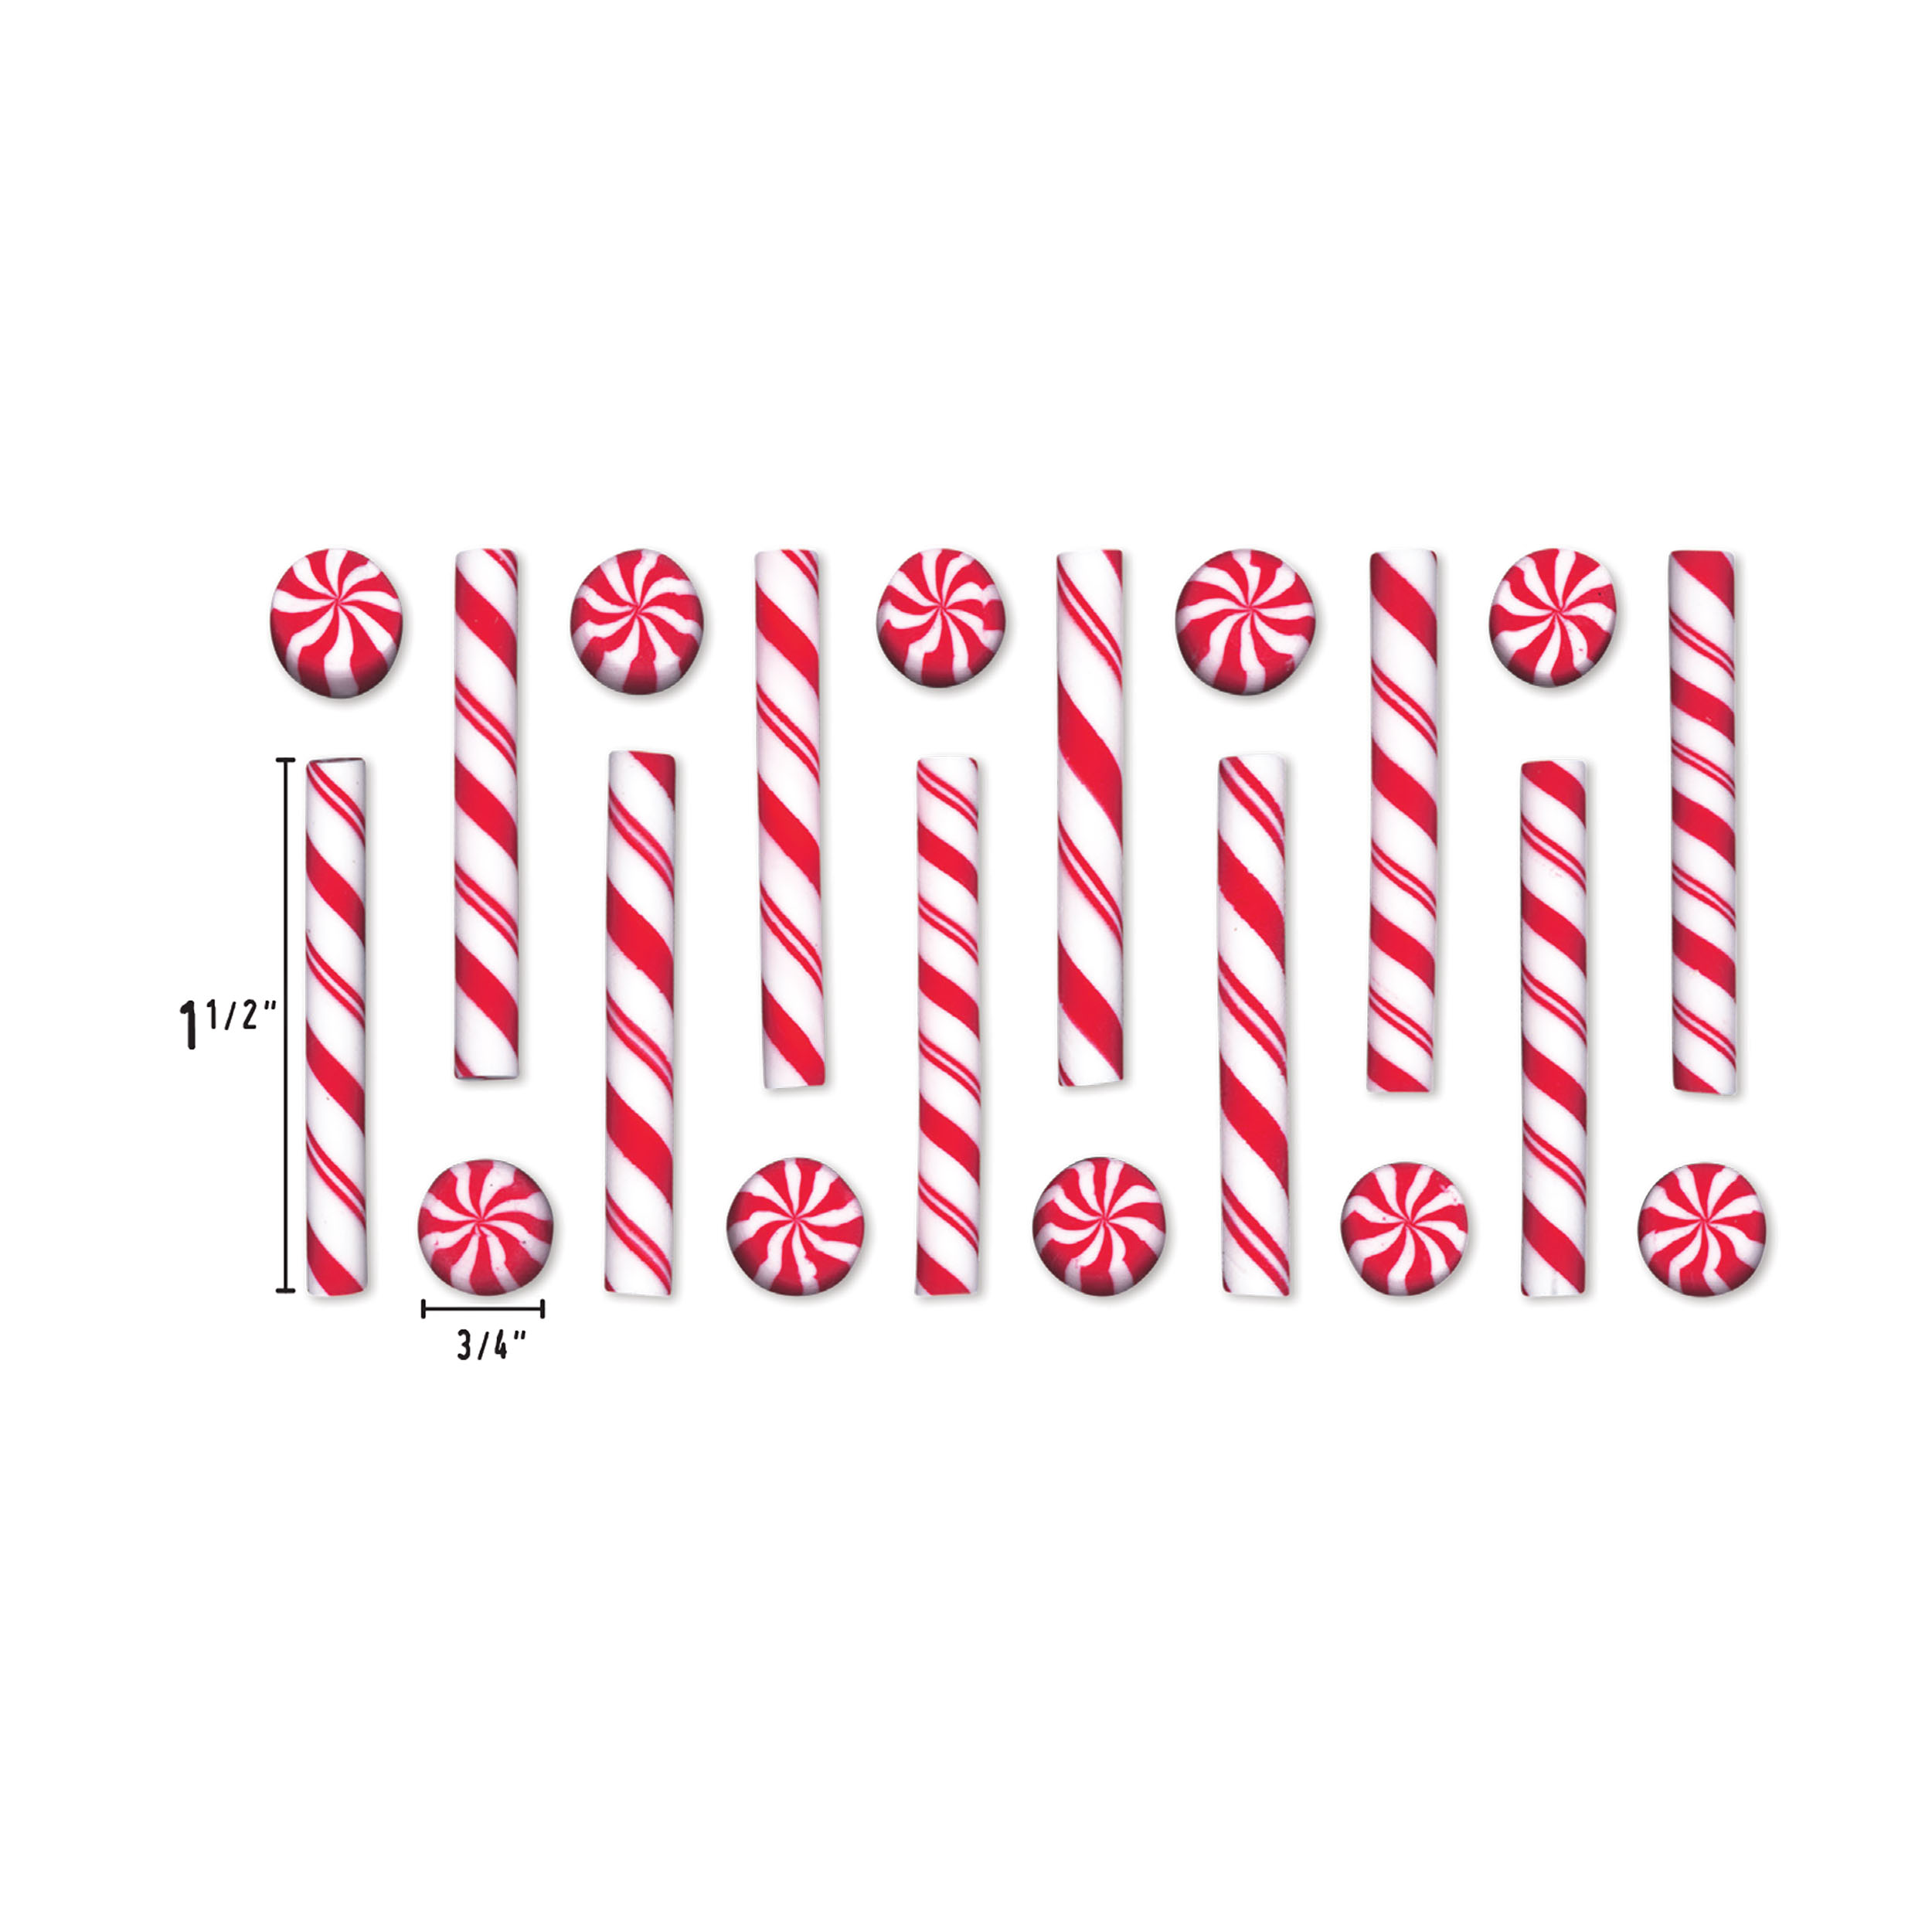 TH94210_-_Confections,_Christmas_-_Dimensions_HI-RES.jpg